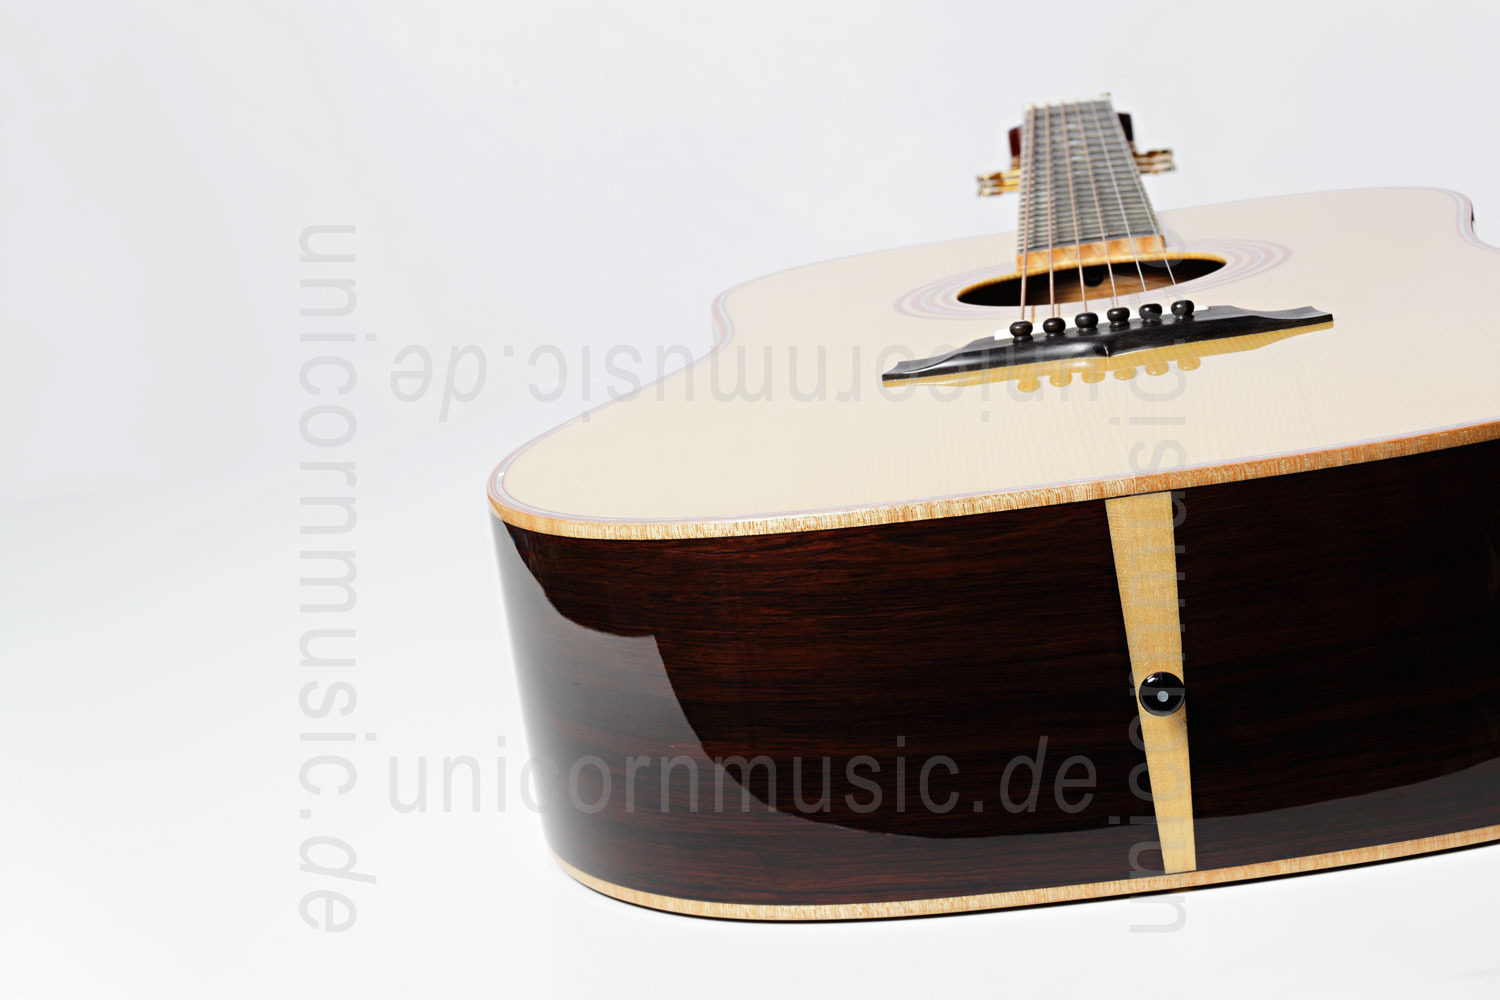 to article description / price Acoustic Guitar TANGLEWOOD TW90/MR ZC - Sundance Series - Dreadnought - all solid + hard case